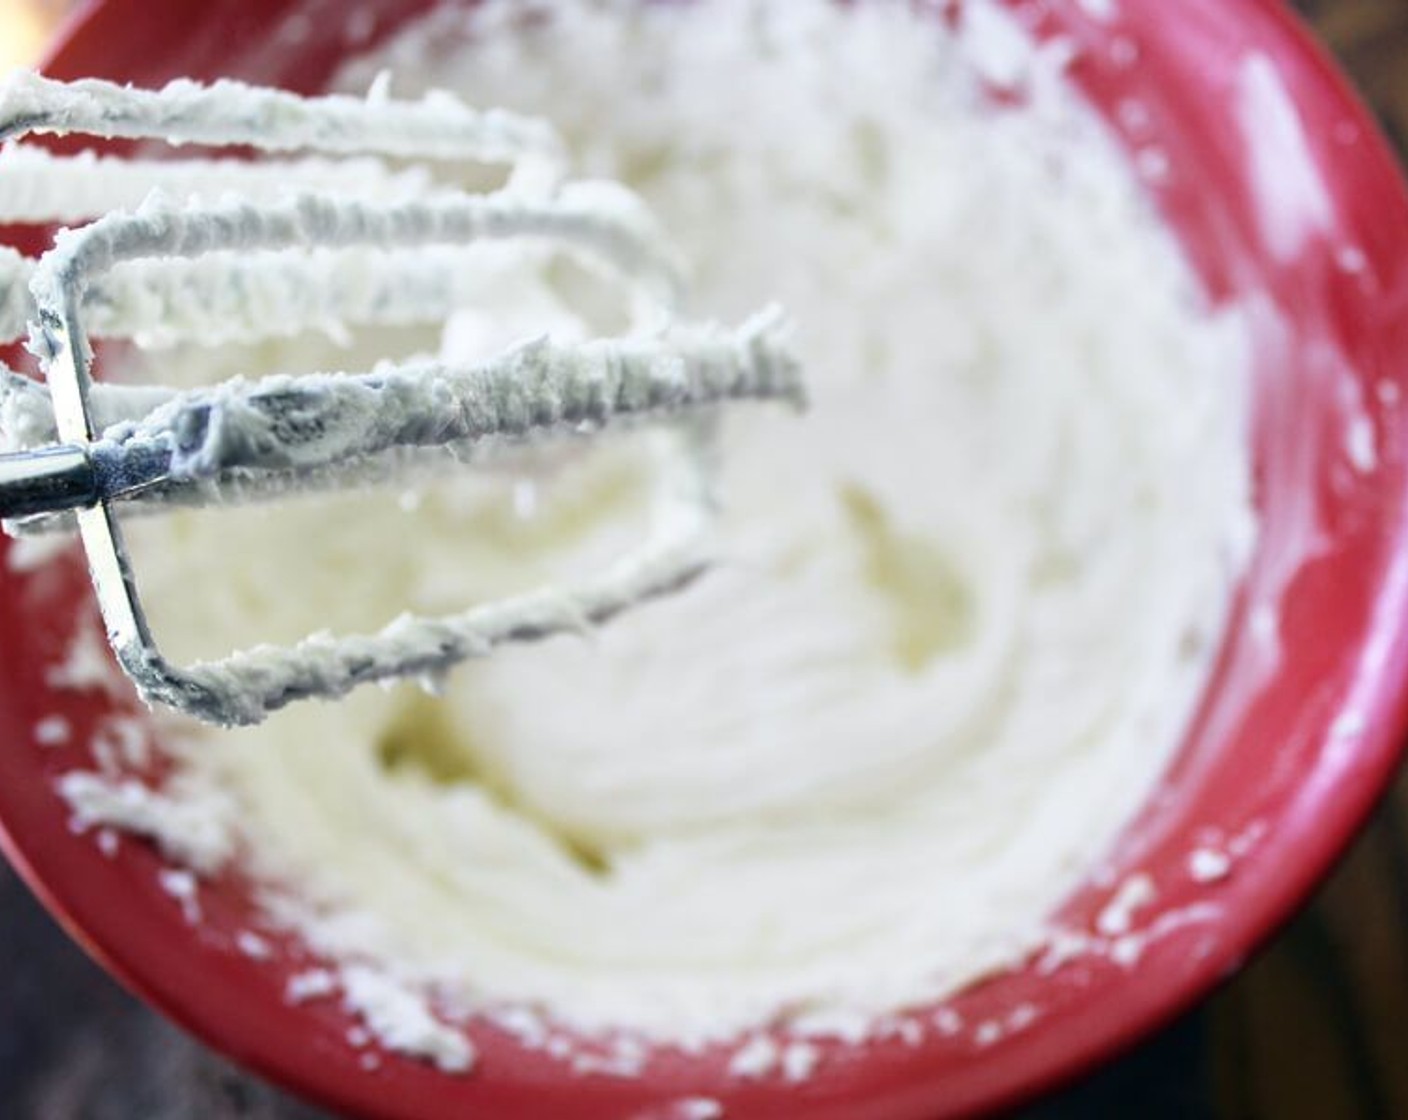 step 7 While the cakes are baking, make the buttercream frosting. On high speed using a hand held mixer, cream the Butter (1 cup) until light and fluffy. Gradually add the Powdered Confectioners Sugar (4 cups). Continue to mix for 5 minutes until smooth and fluffy.